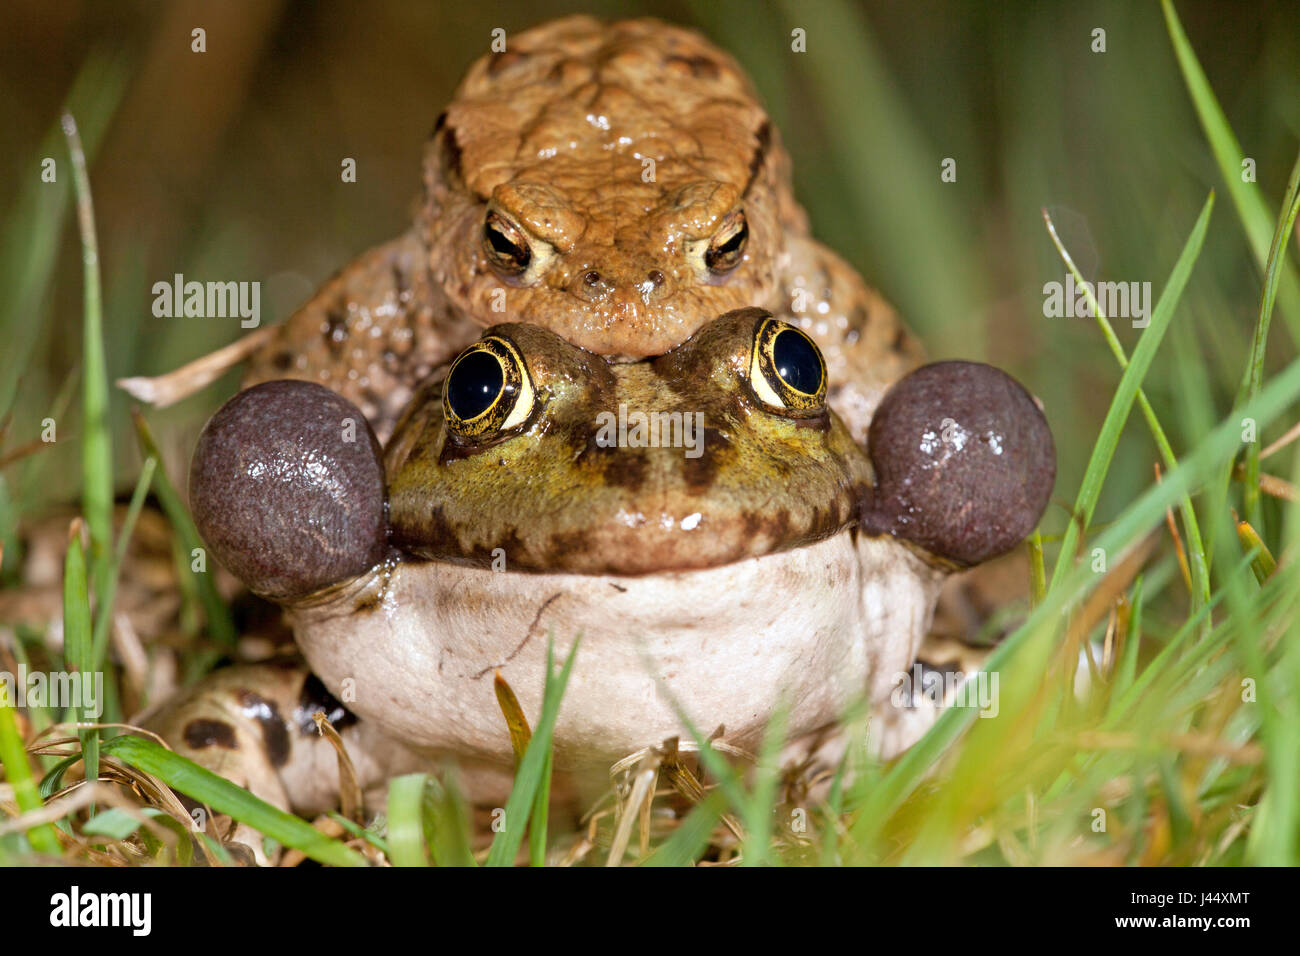 photo of a common toad on a marsh frog Stock Photo